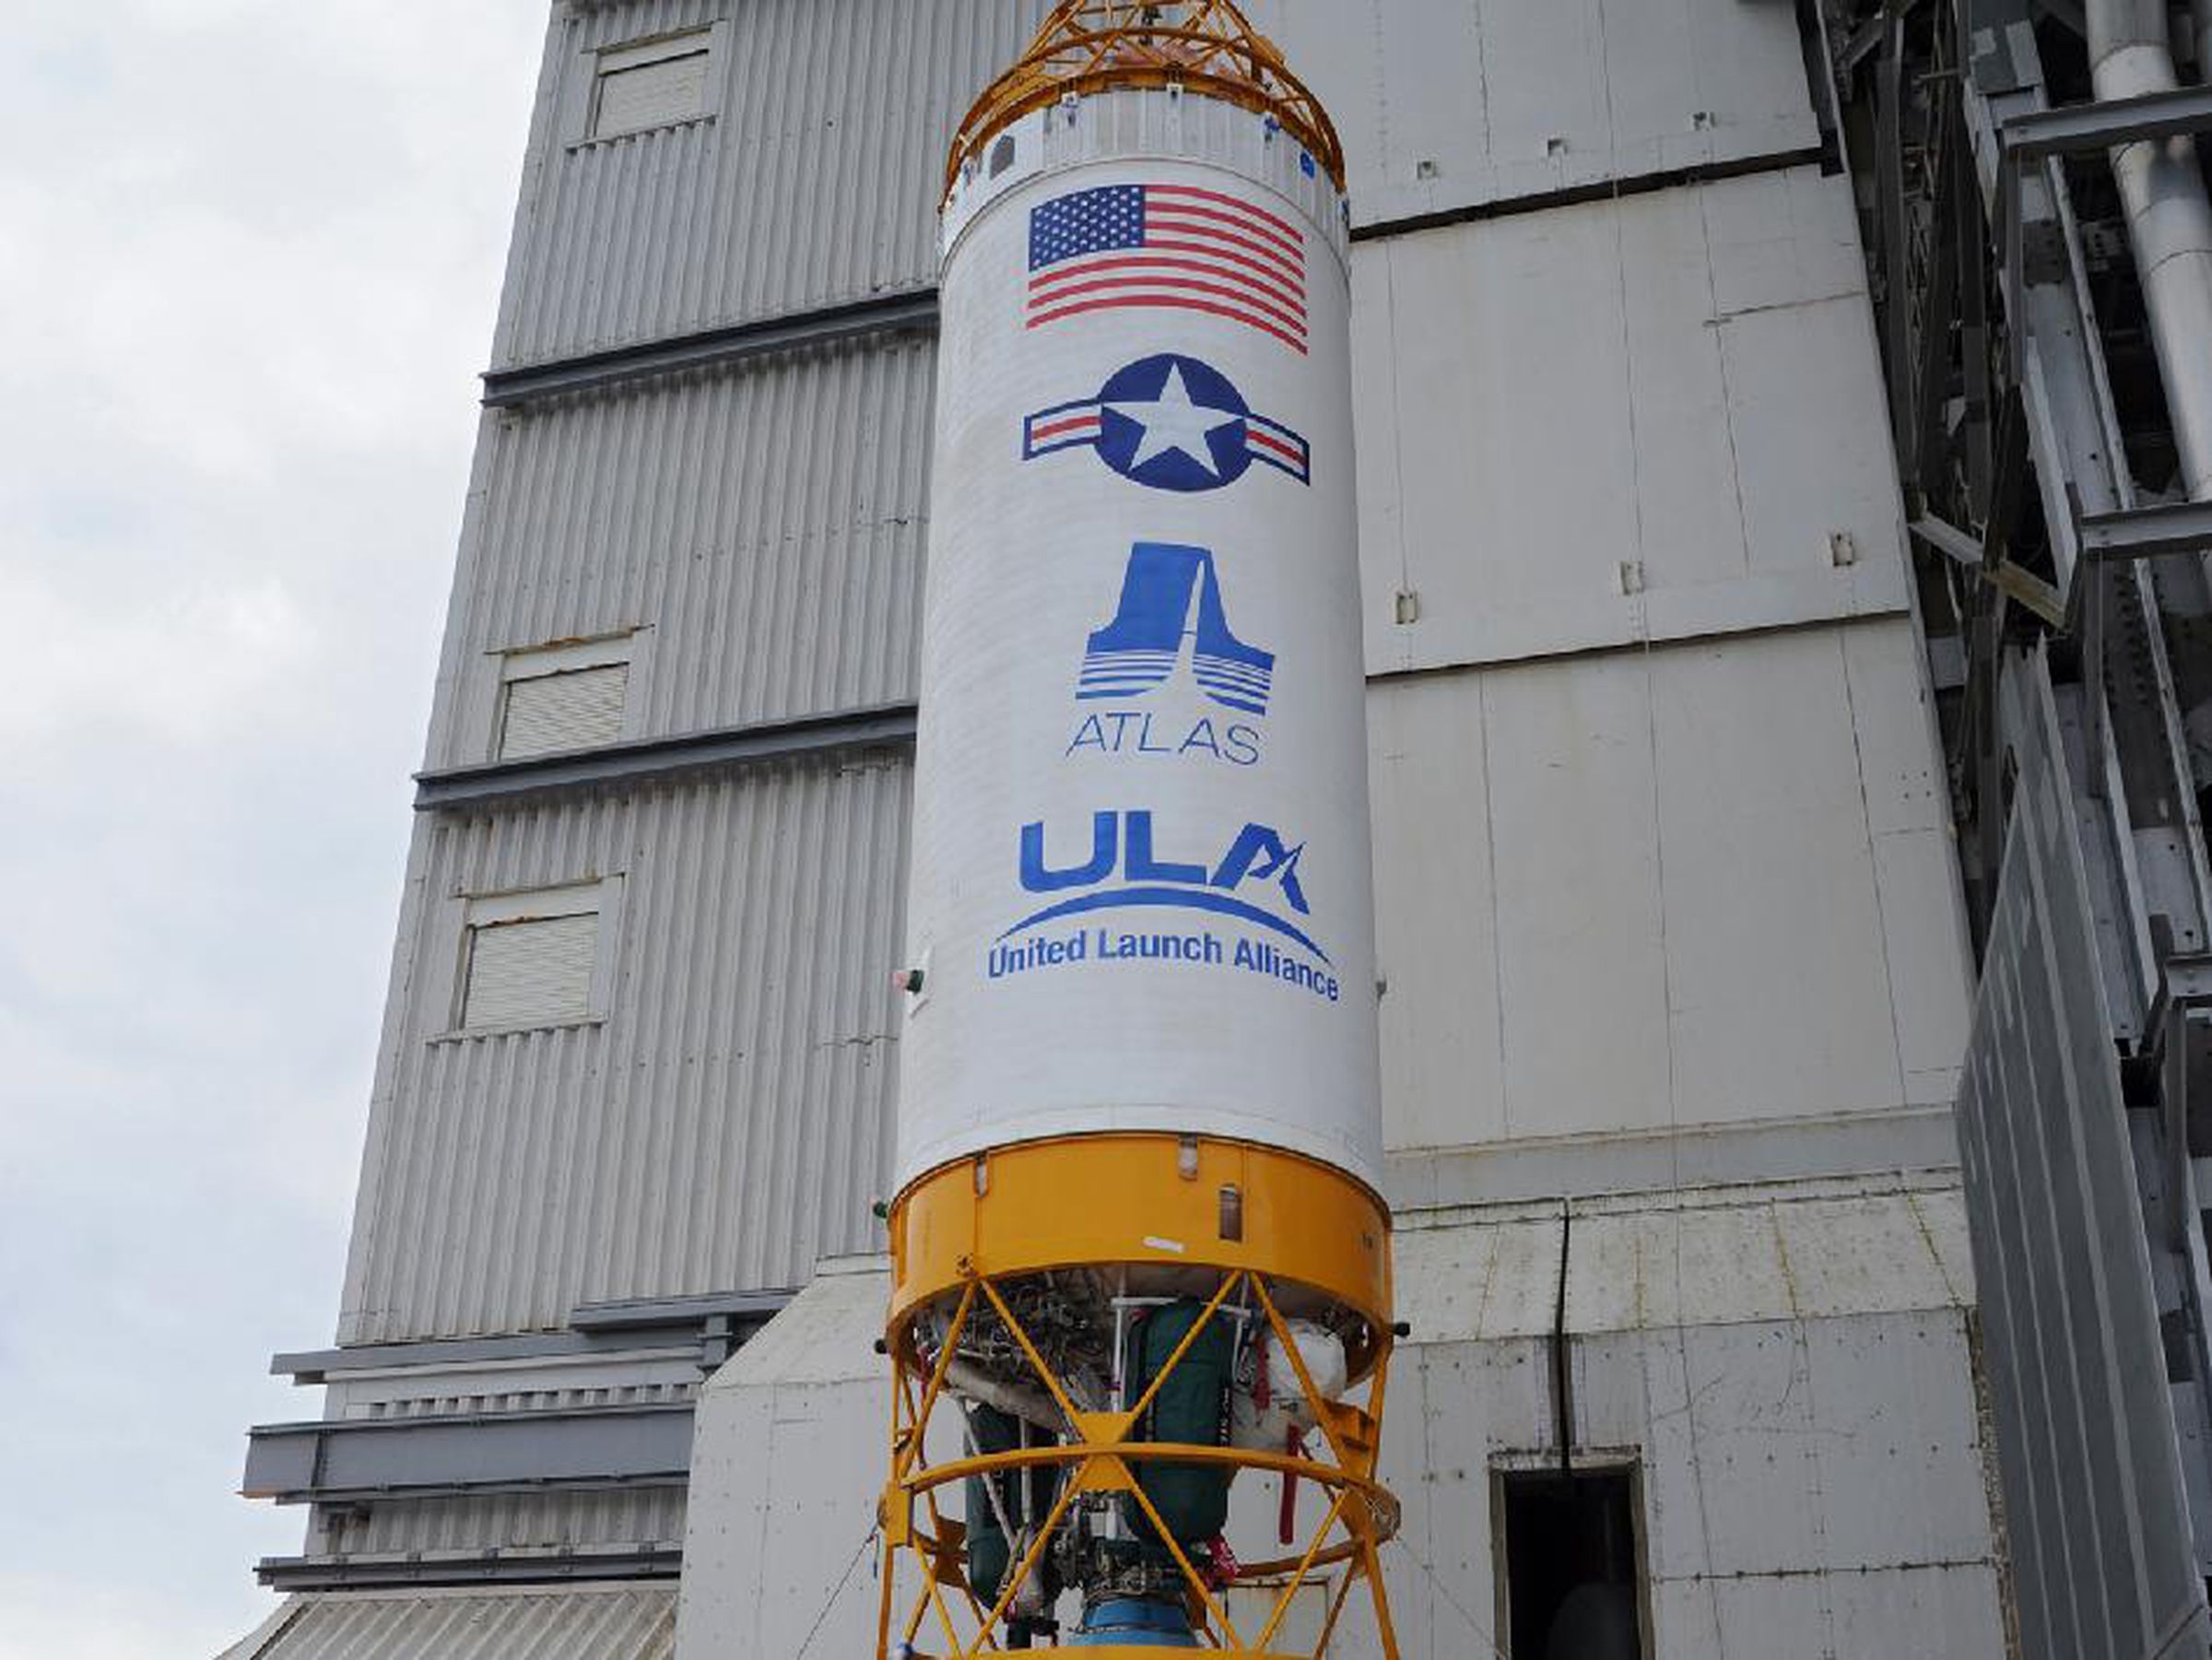 A Centaur upper stage, which Nanoracks eventually wants to turn into a habitat.